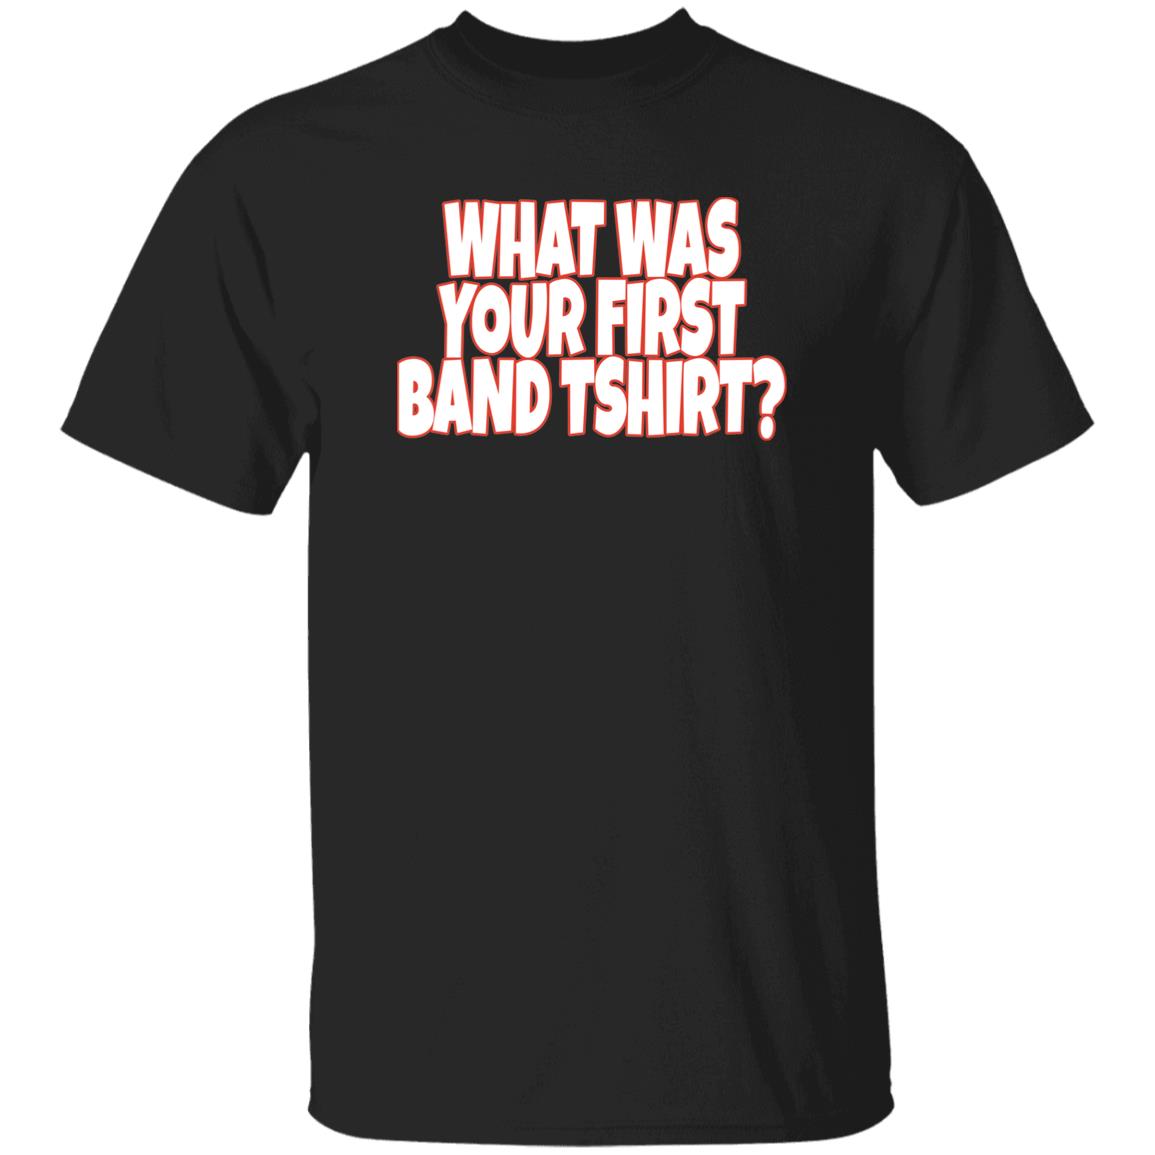 Rock N Roll Nation Live What Was Your First Band Tshirt Shirt